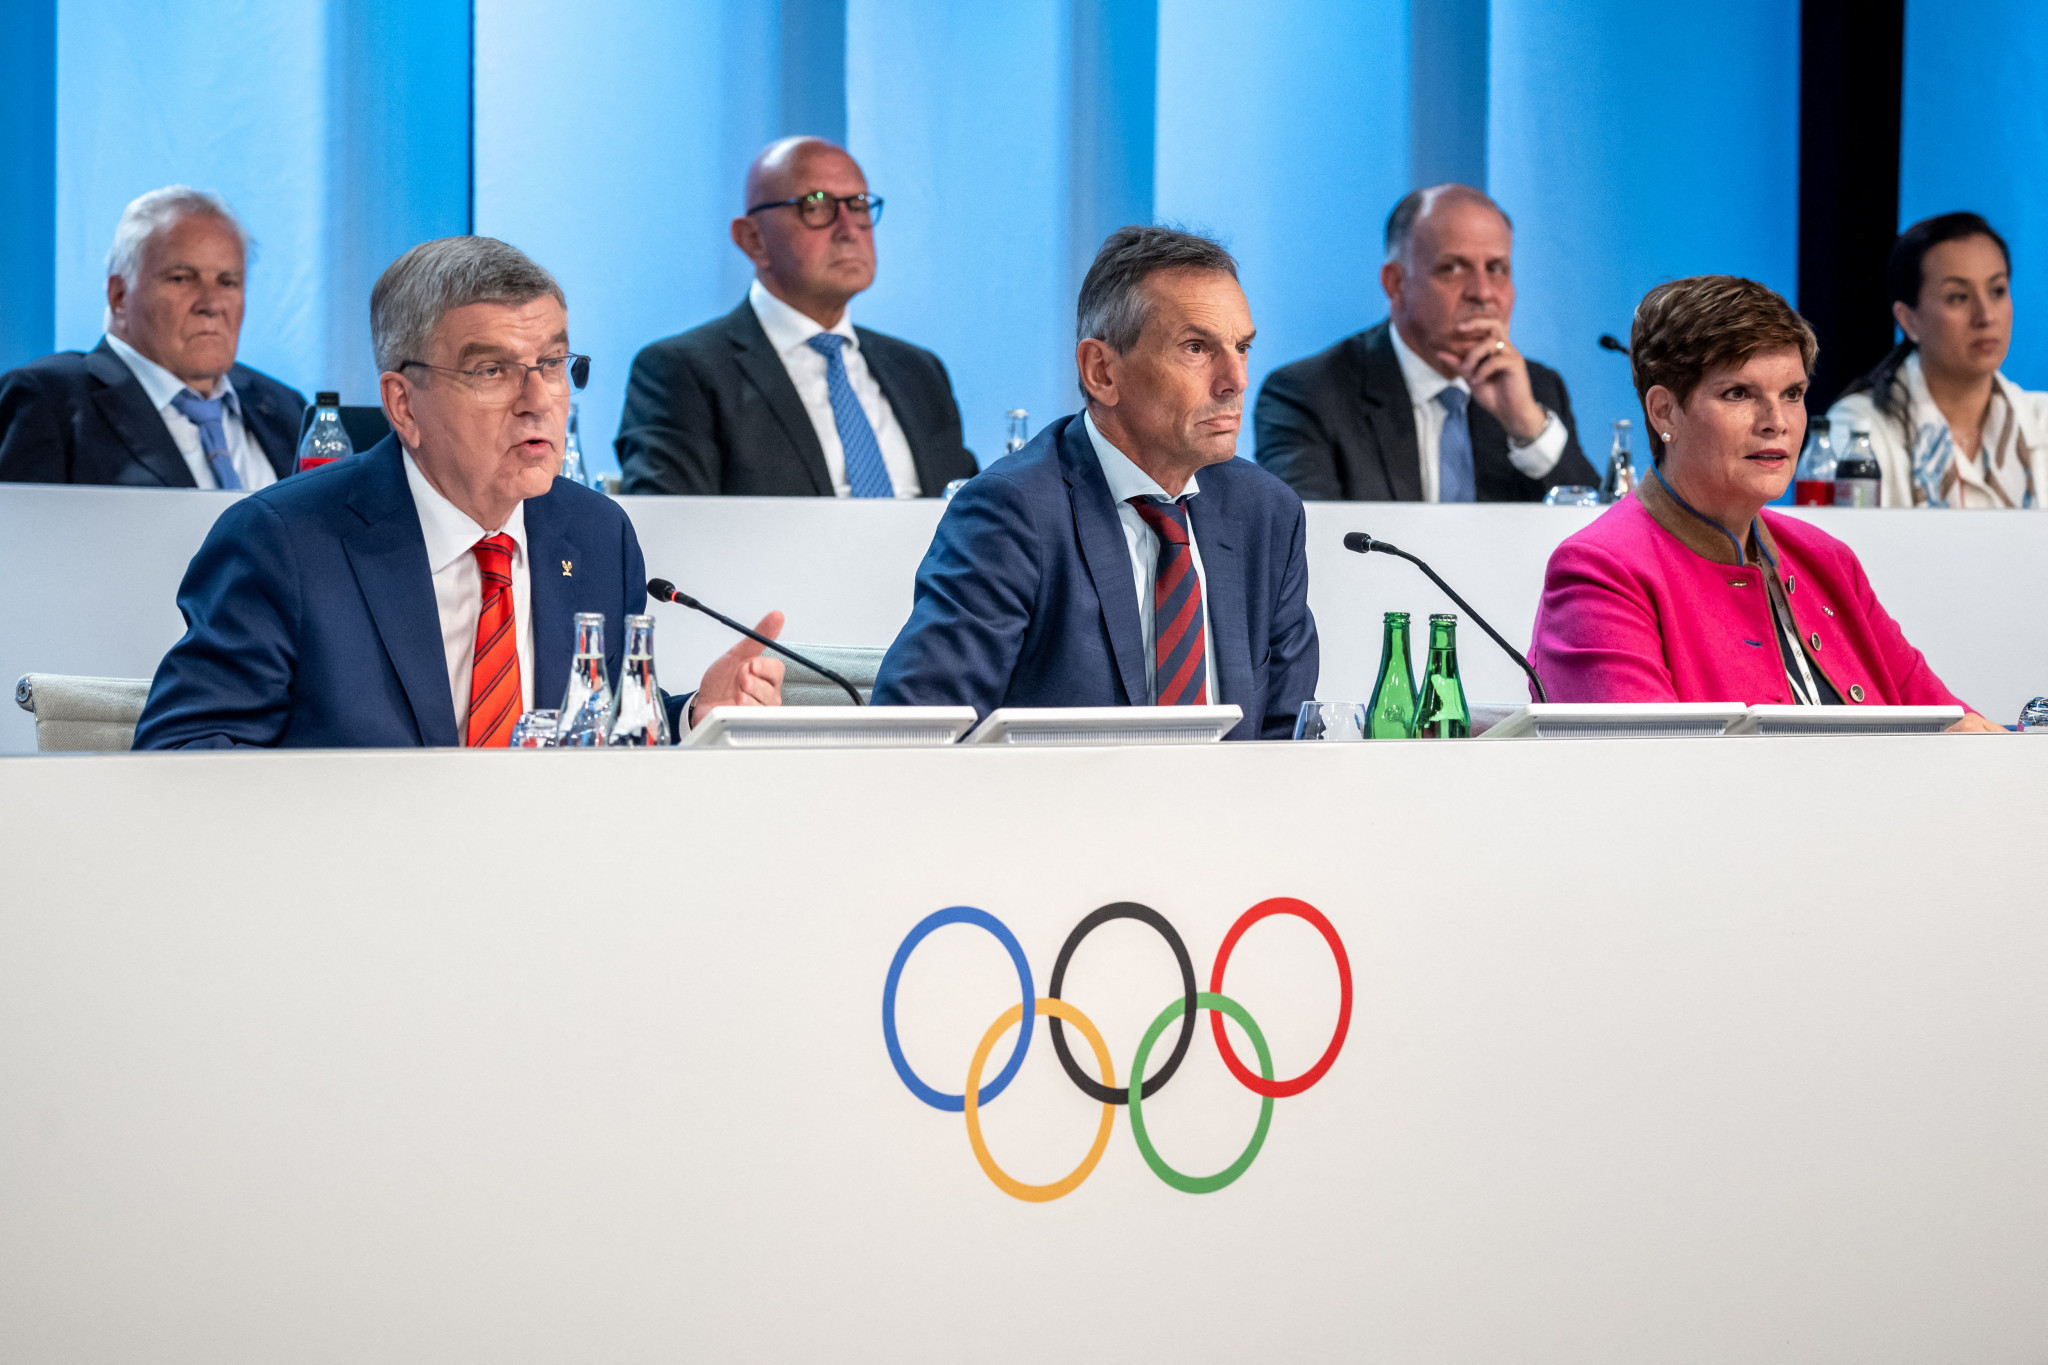 140th International Olympic Committee Session